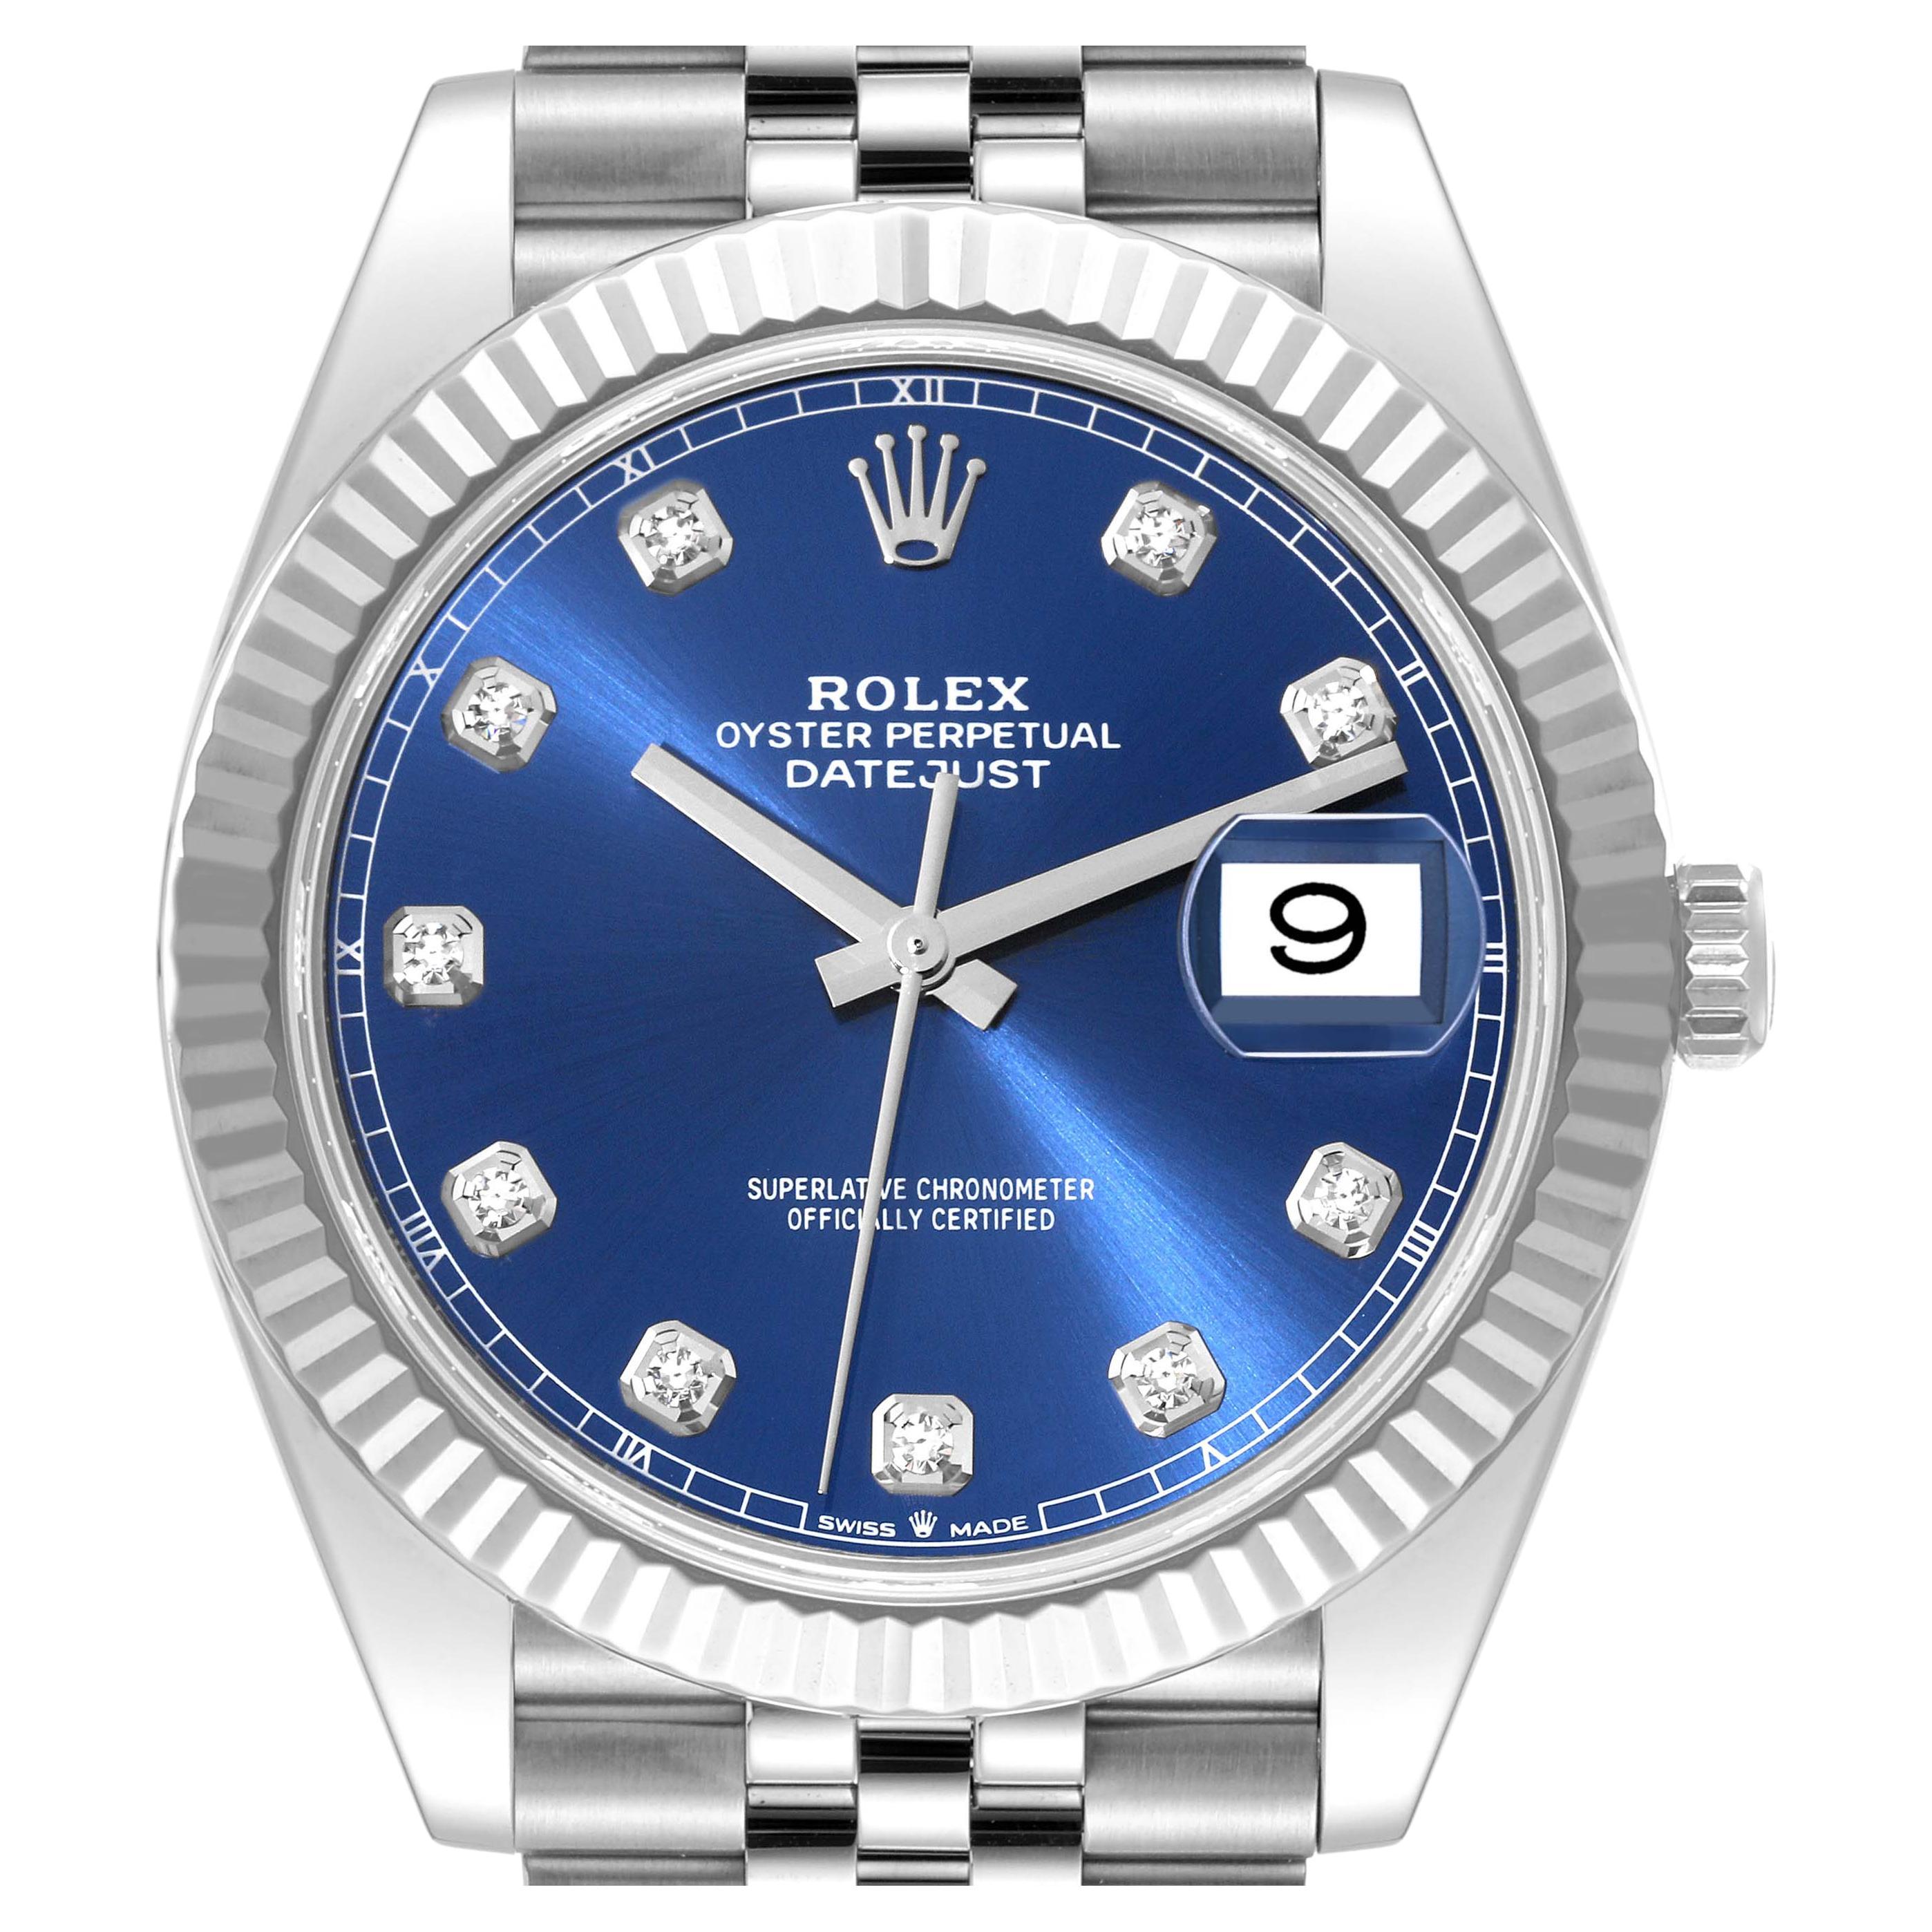 Luxury Holiday Pop-Up to Stock Rare Rolex Model